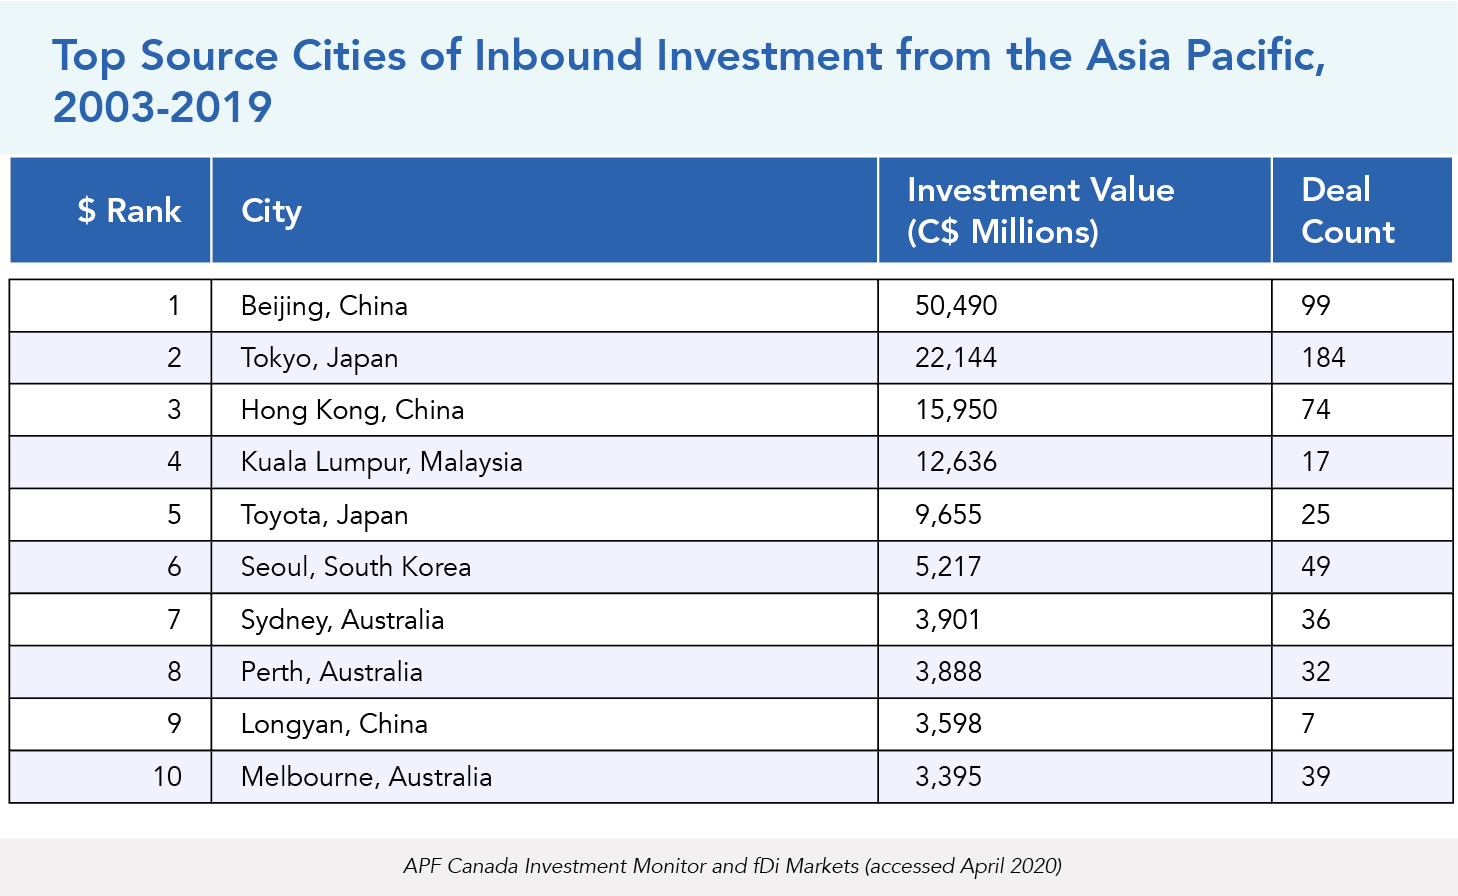 Top Source Cities of Inbound Investment from the Asia Pacific, 2003-2019